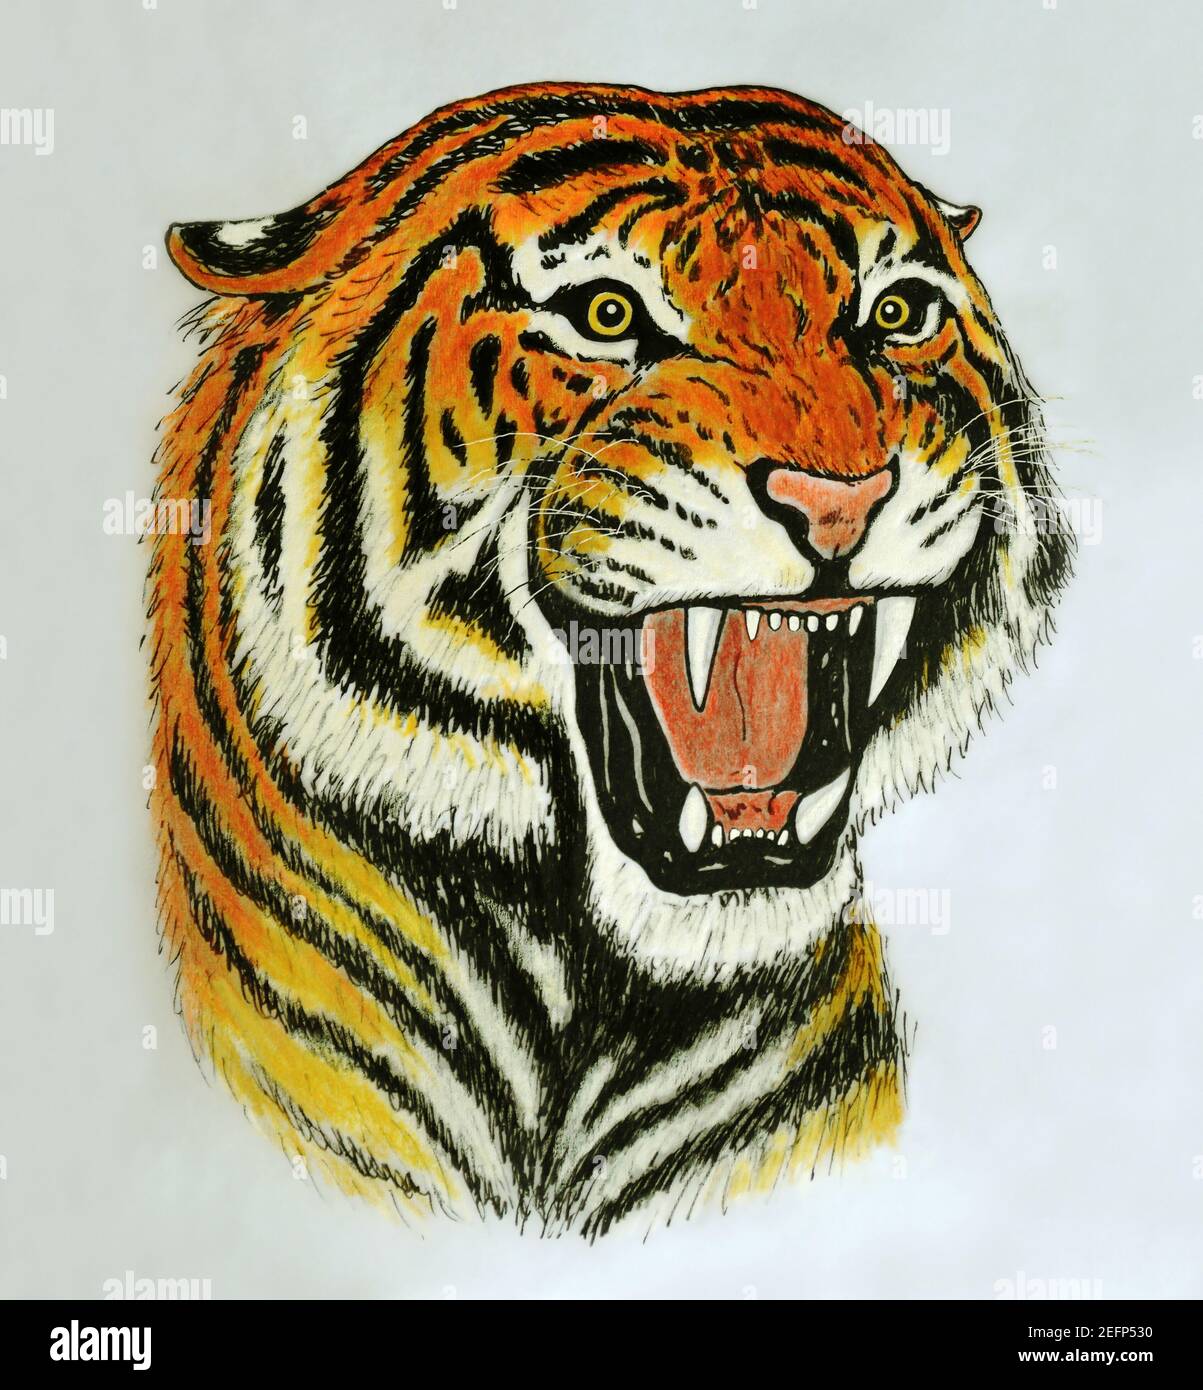 hand drawing of tiger face roaring Stock Photo